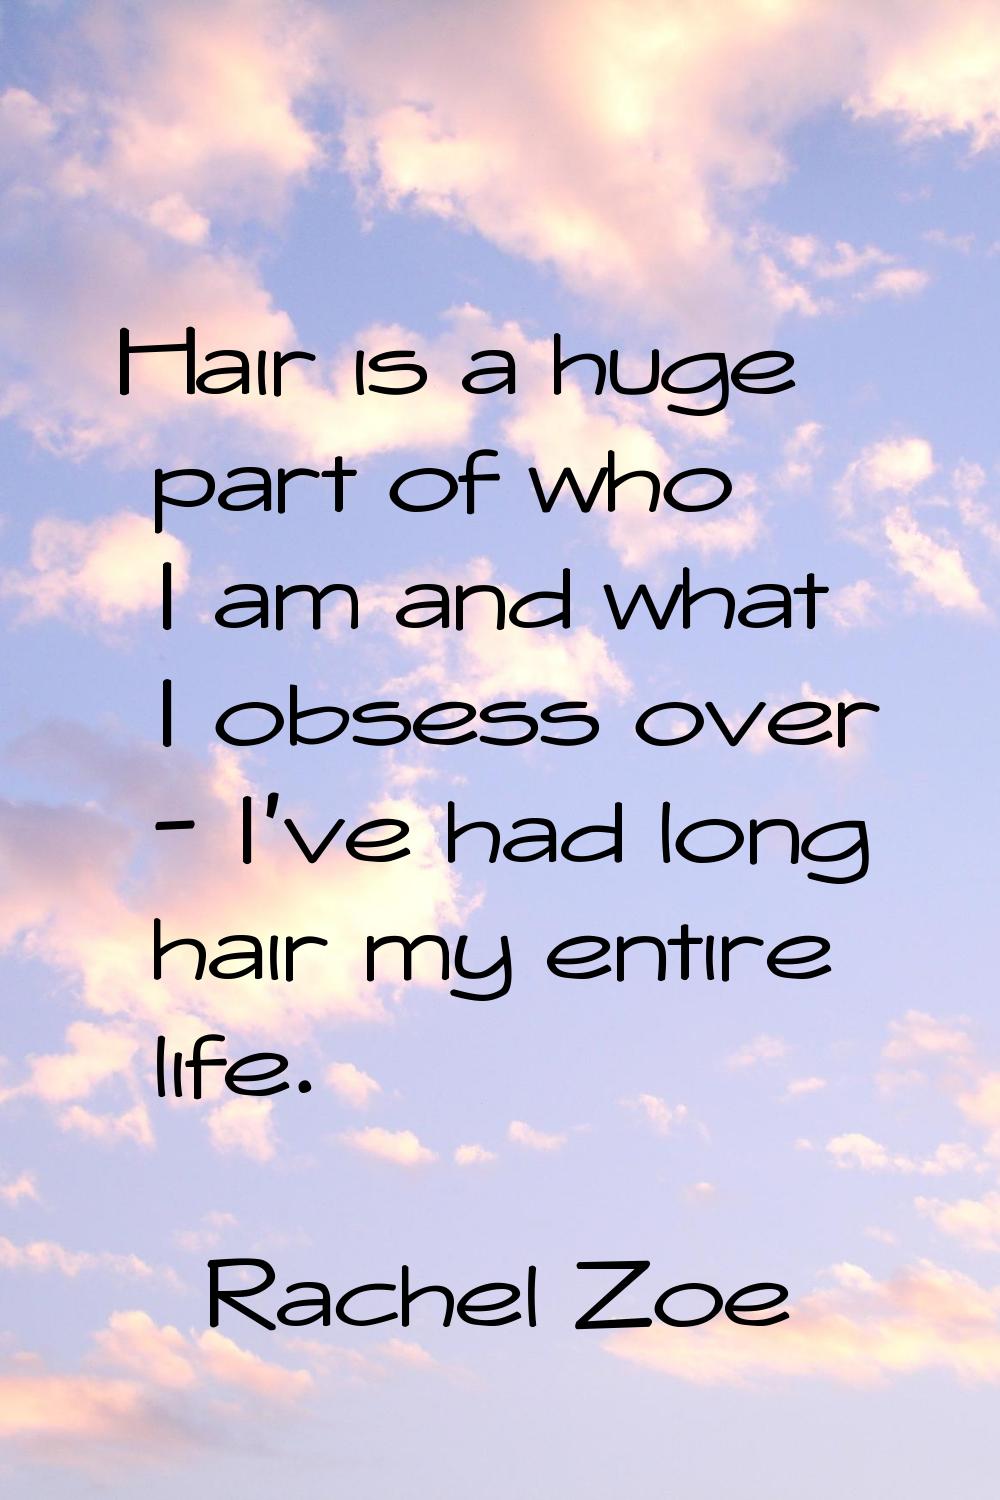 Hair is a huge part of who I am and what I obsess over - I've had long hair my entire life.